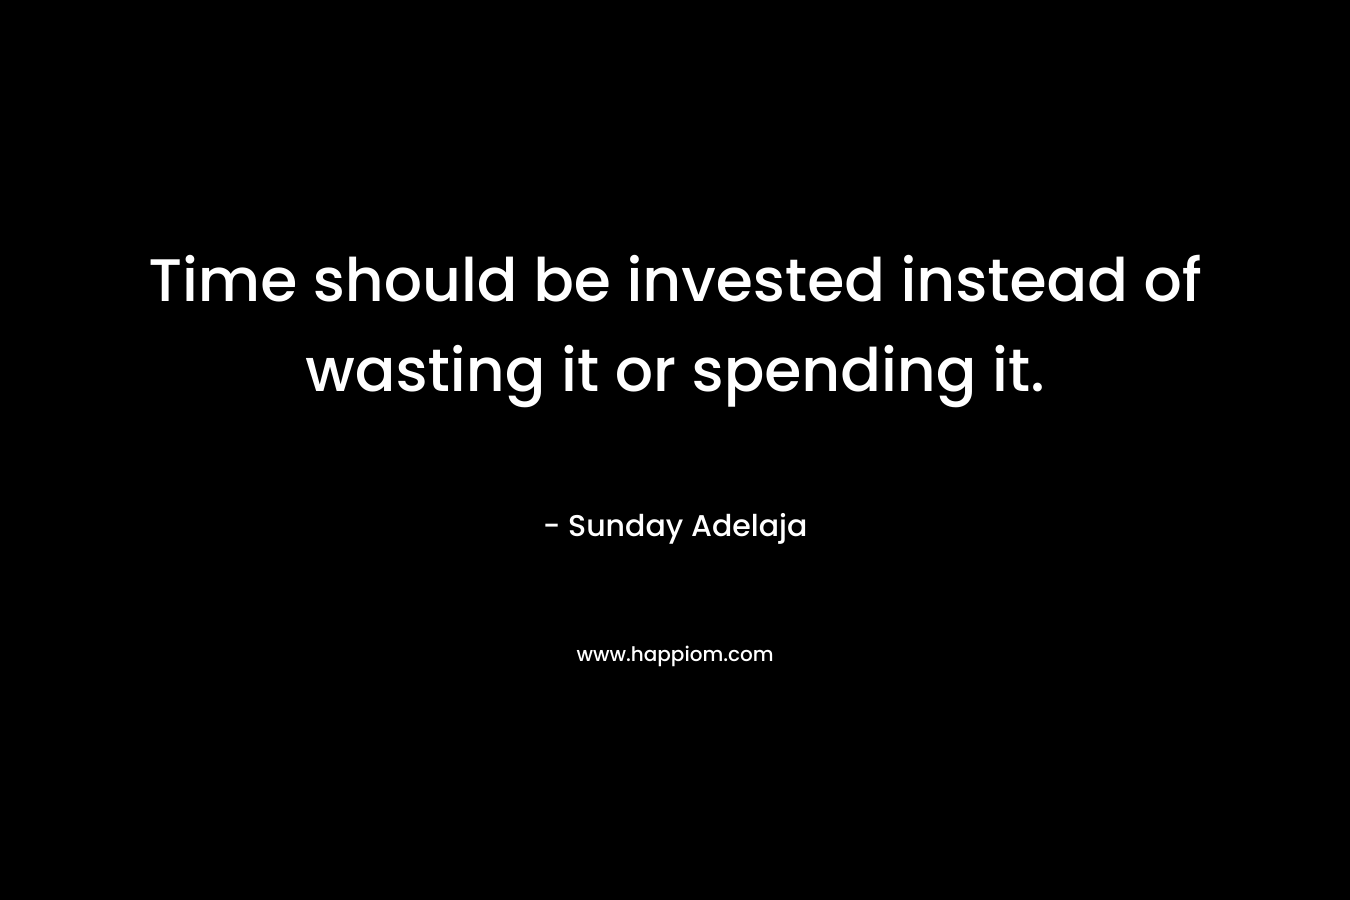 Time should be invested instead of wasting it or spending it.